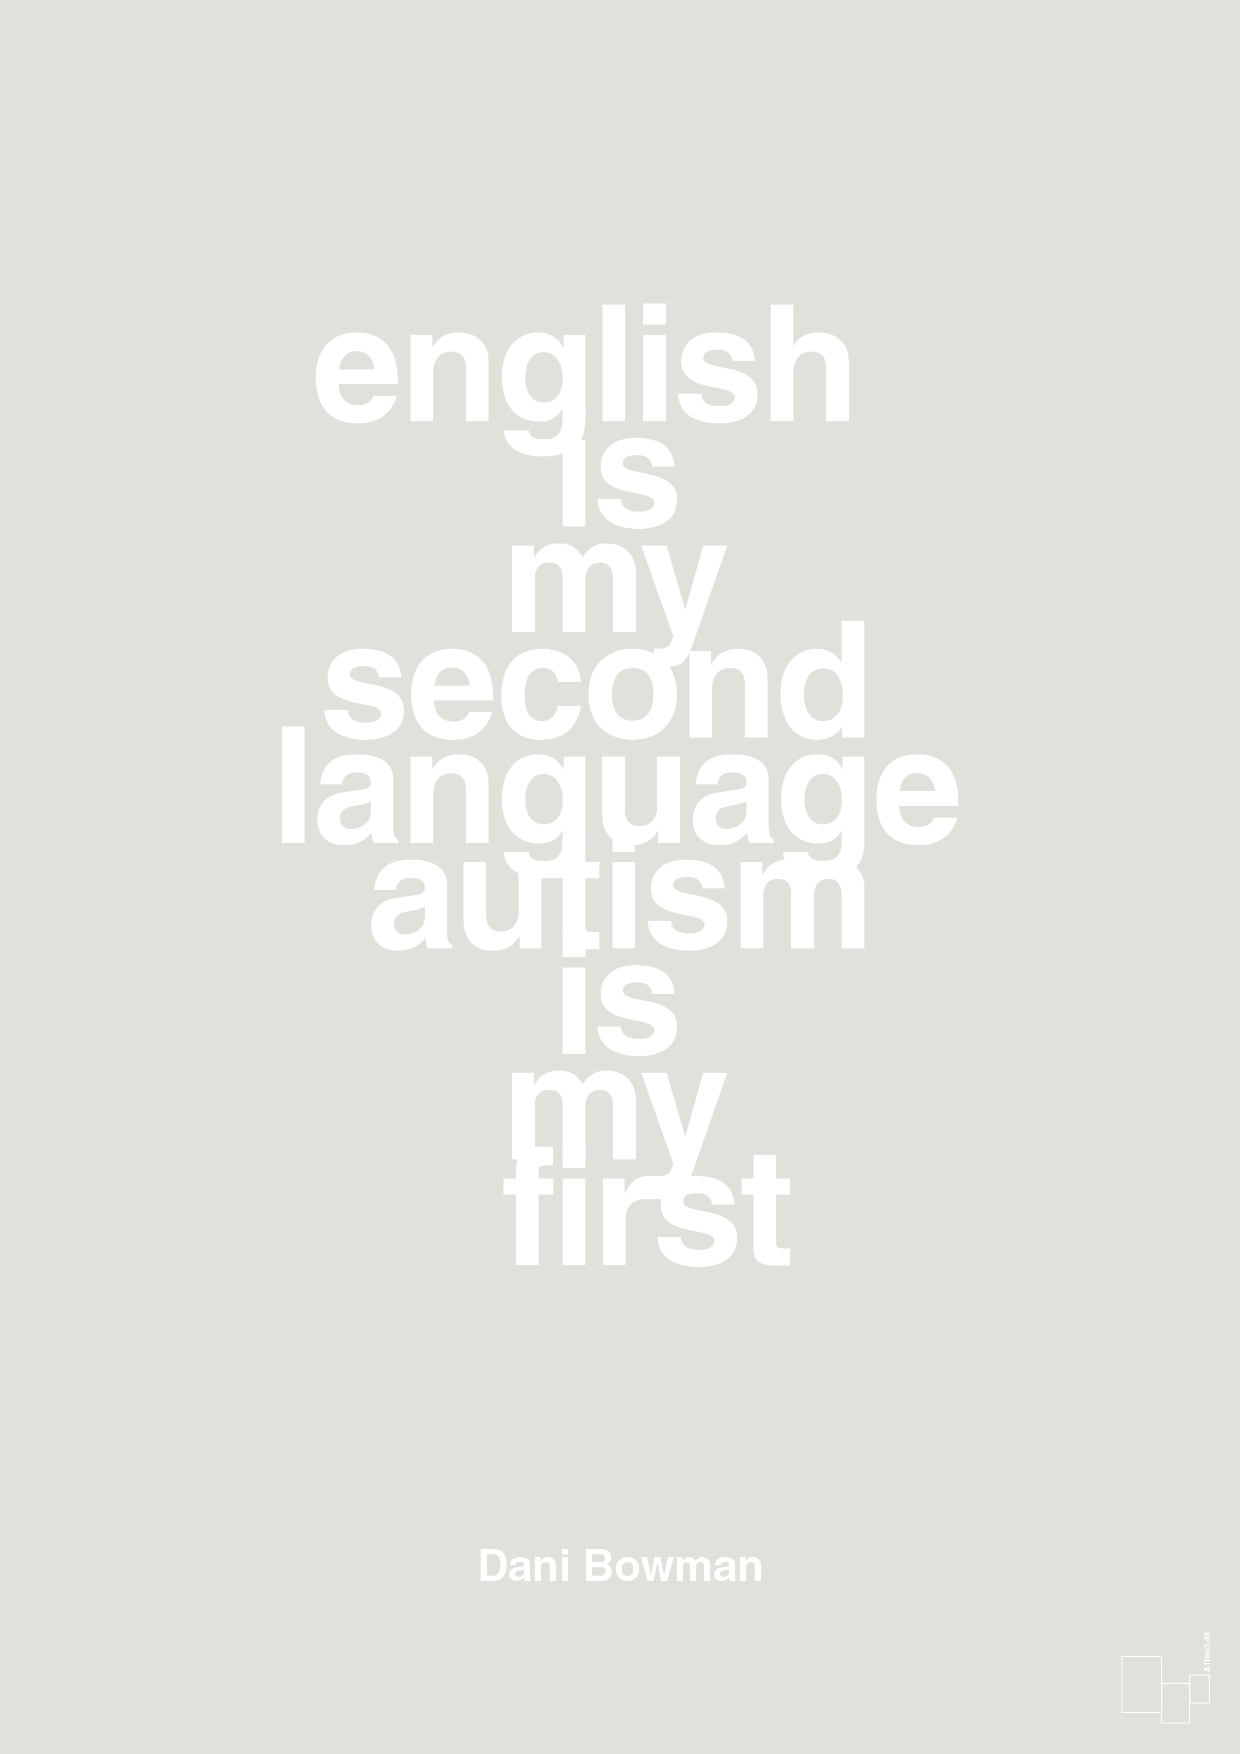 english is my second language autism is my first - Plakat med Samfund i Painters White